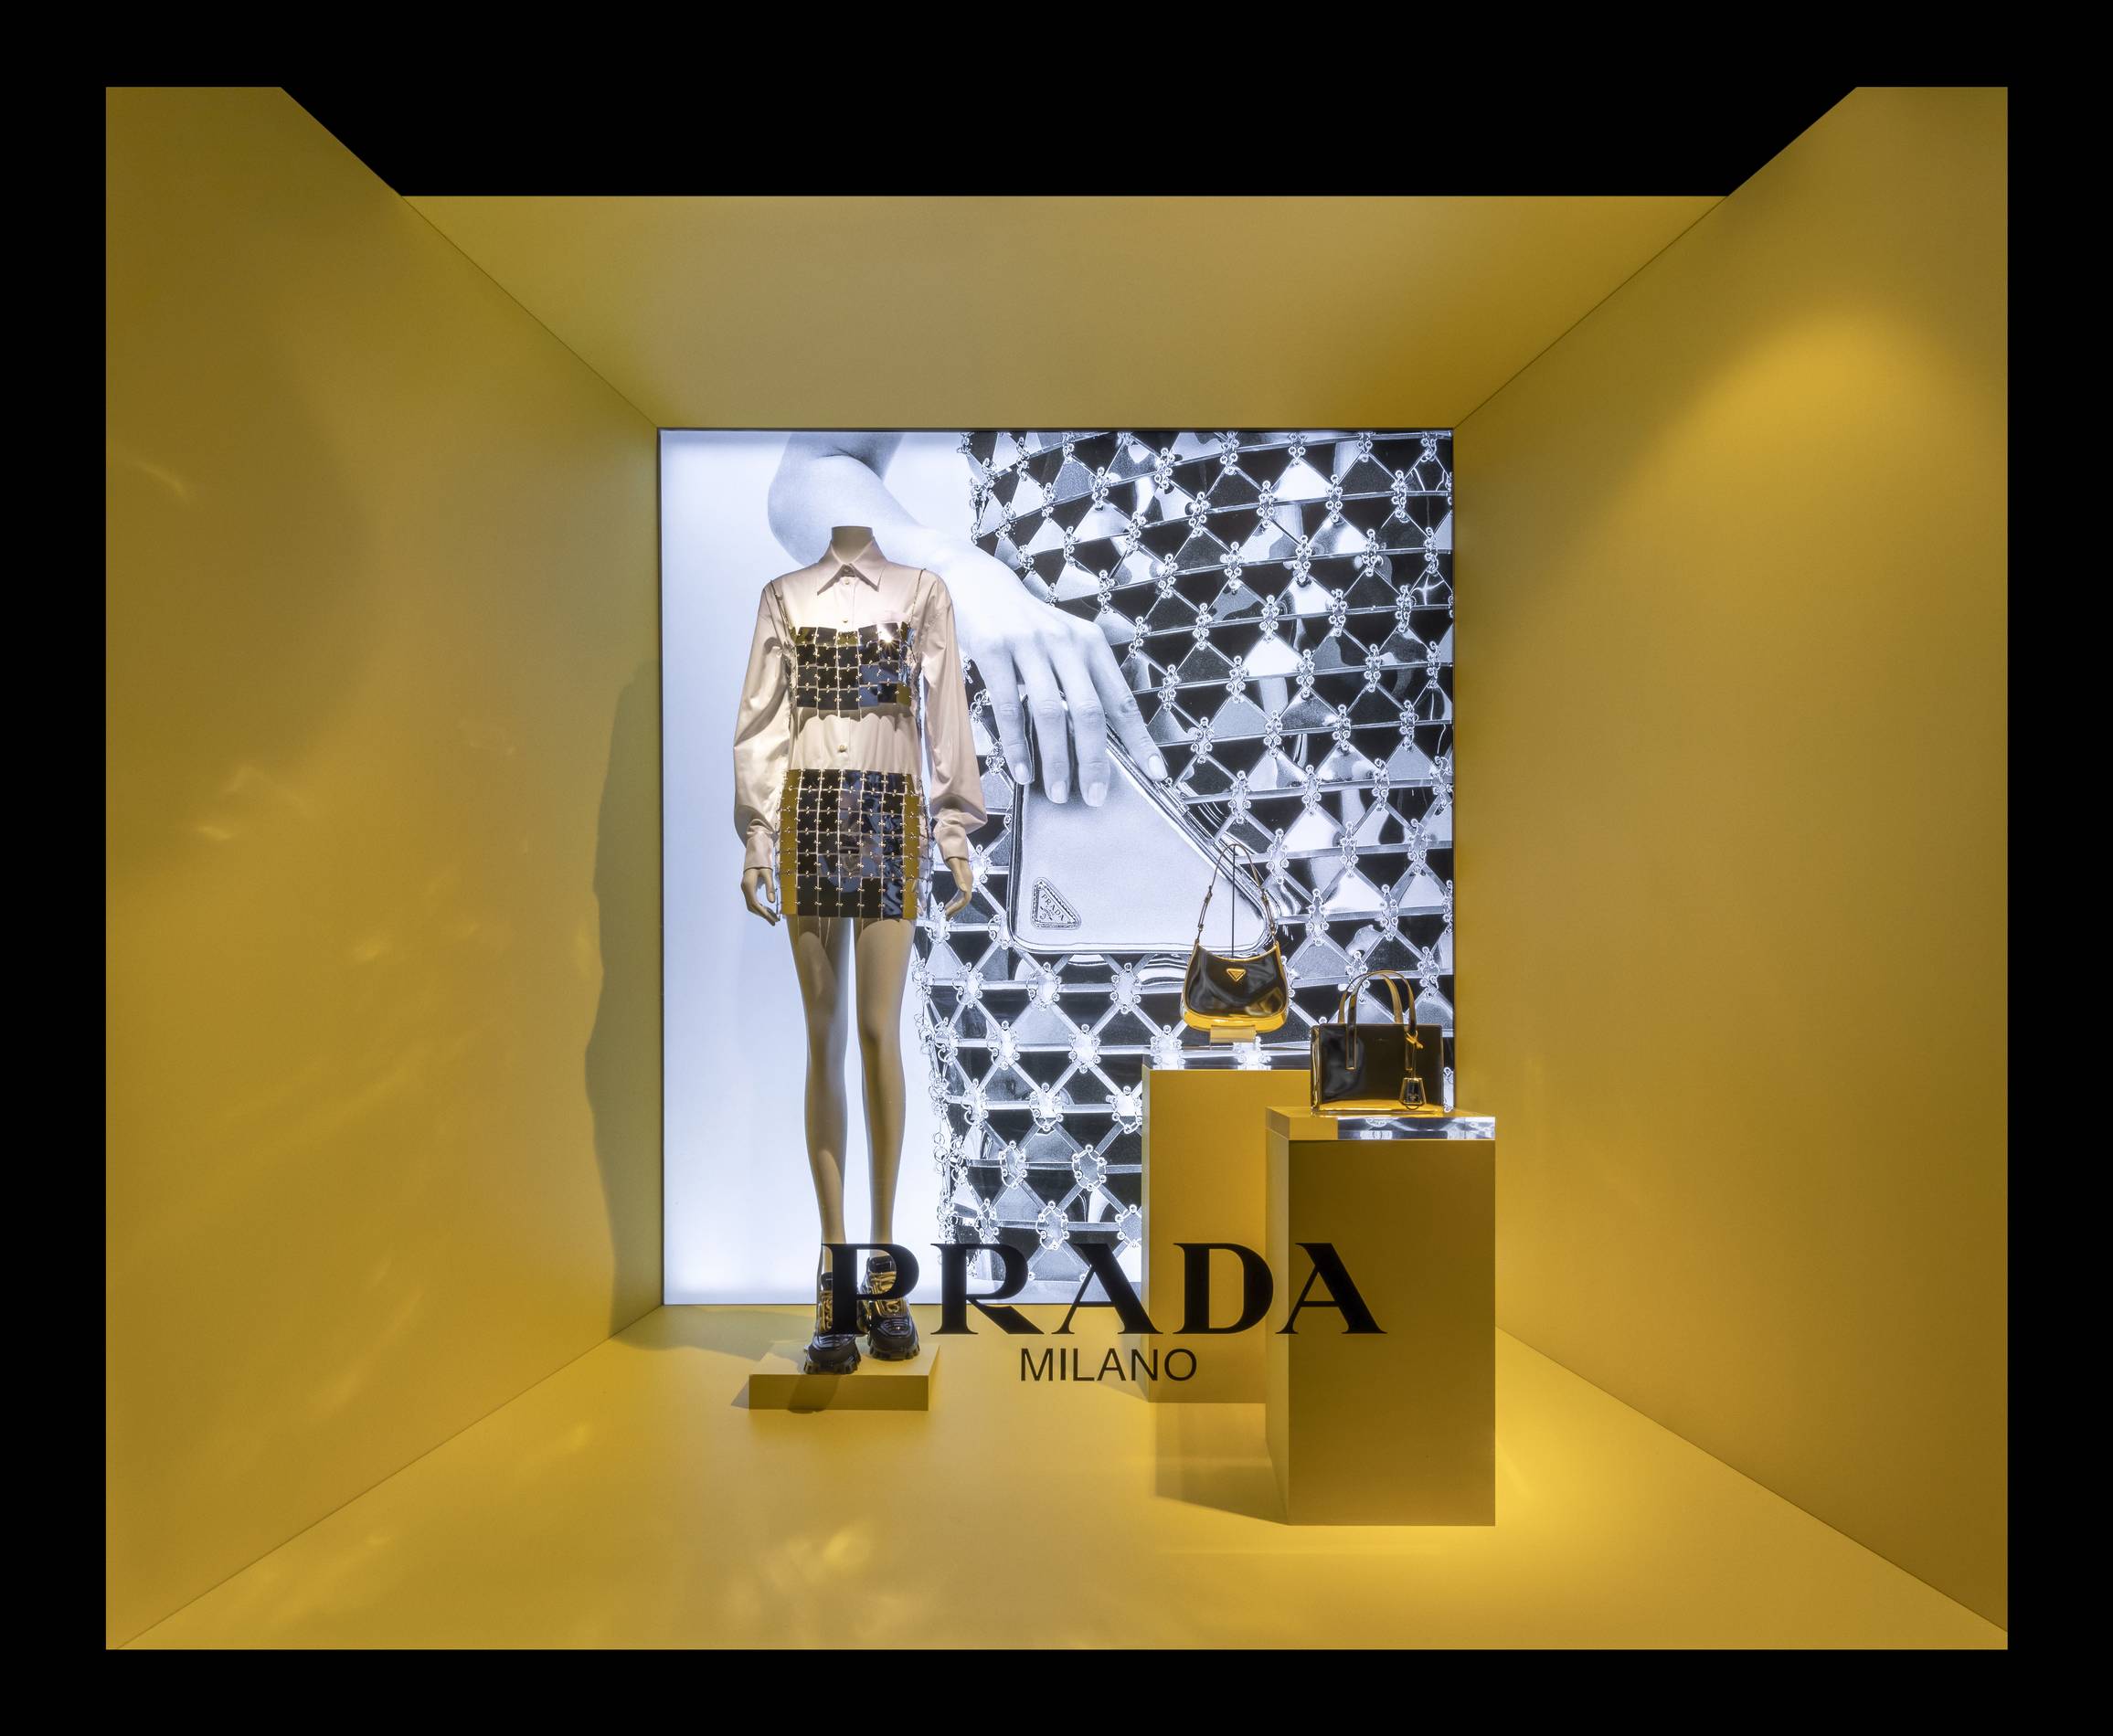 prada's holiday collection window display at saks fifth ave in nyc